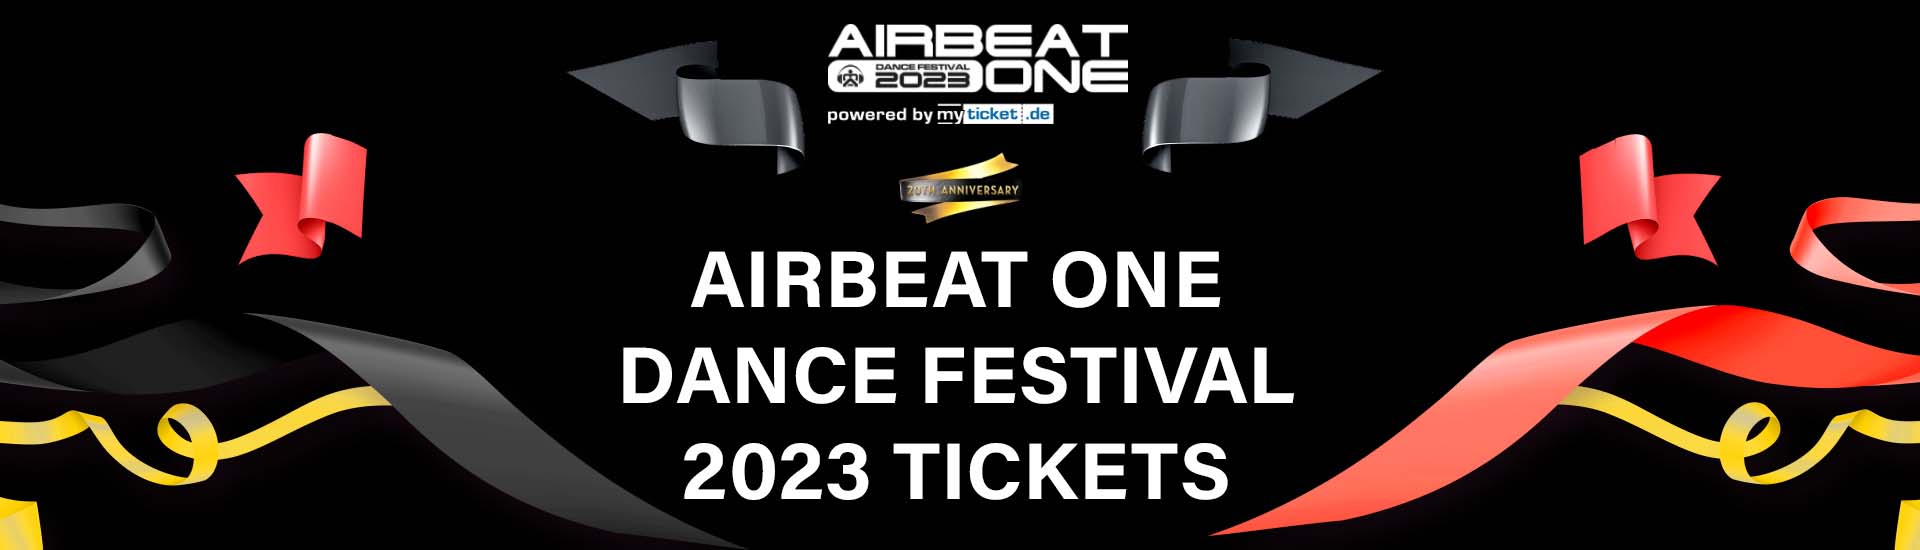 Airbeat One Dance Festival 2023 Tickets